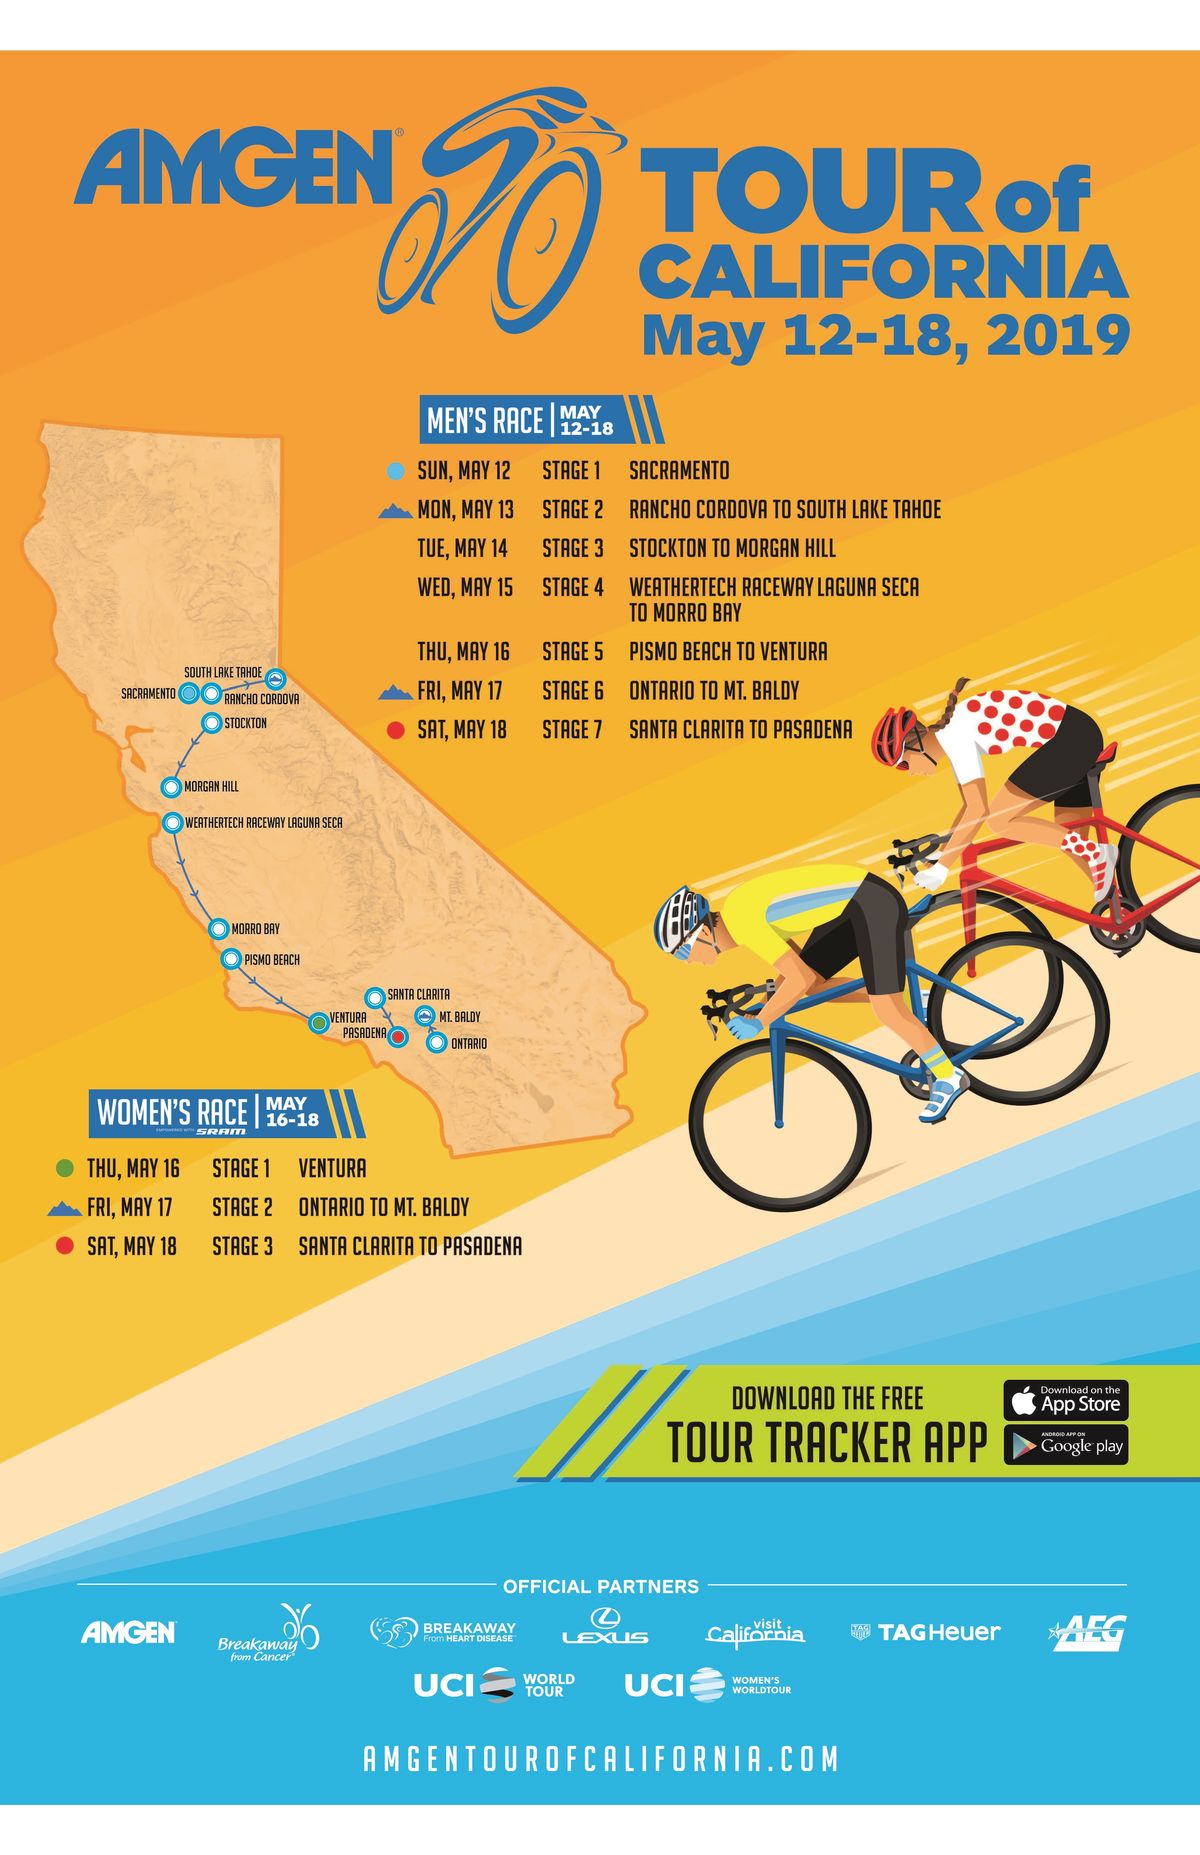 Amgen Tour of California, California's largest sporting event, will travel from Sacramento to Pasadena in May 2019. (Graphic: Bu